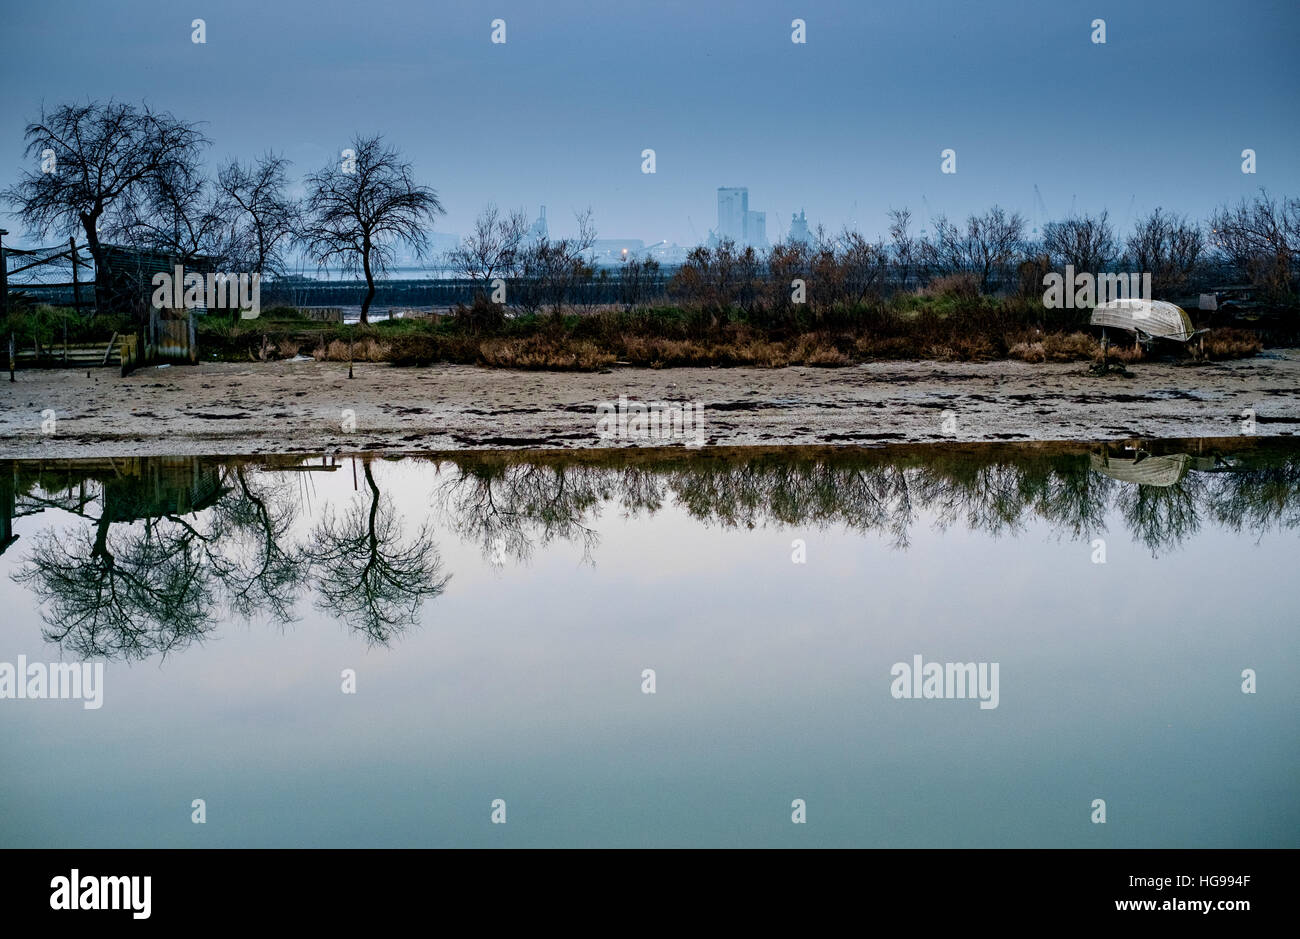 Winter evening reflections on Marina di Ravenna swamp. Industrial landscape on the background. Stock Photo